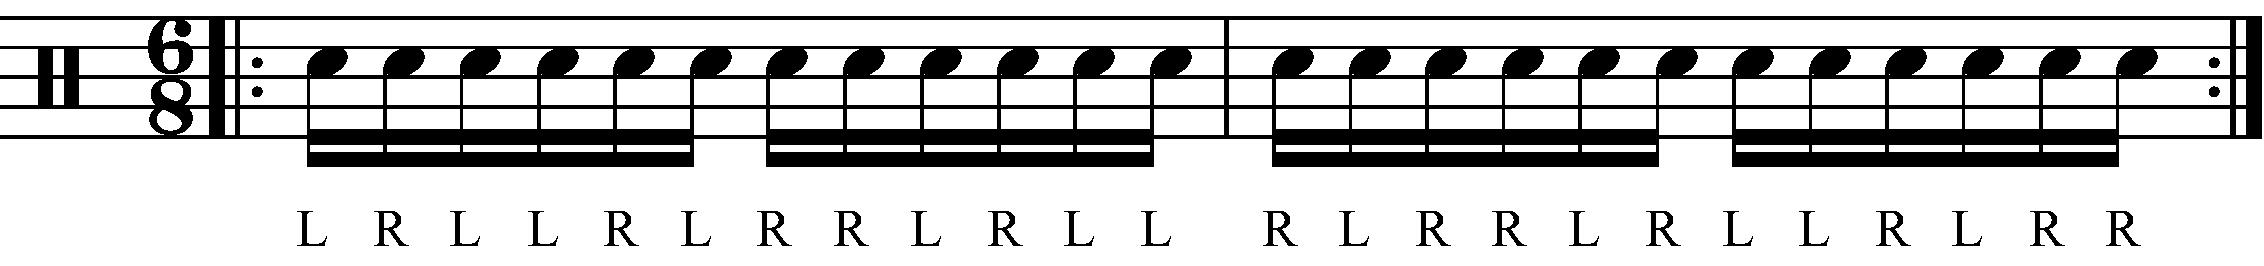 A Paradiddle in 6/8 with reverse sticking